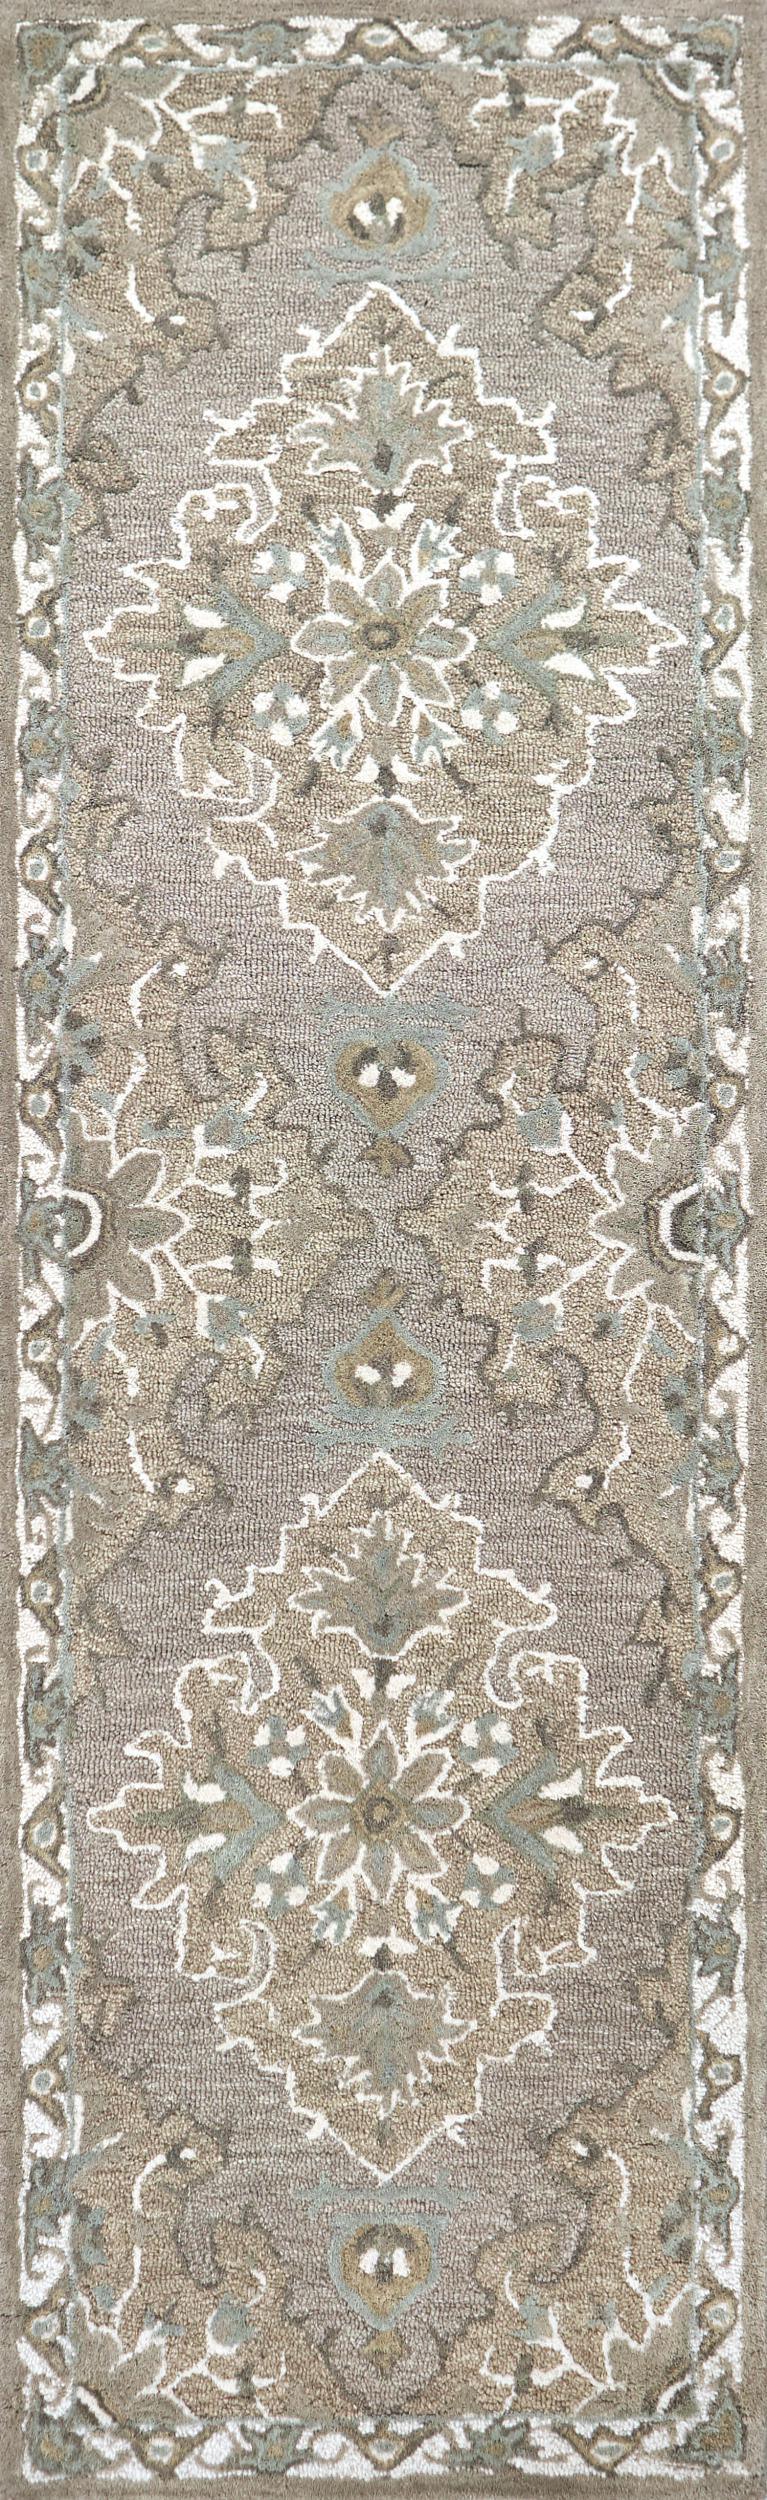 Awad Central Medallion Tan Large Area Rugs For Living Room Area Rugs LOOMLAN By LOOMLAN